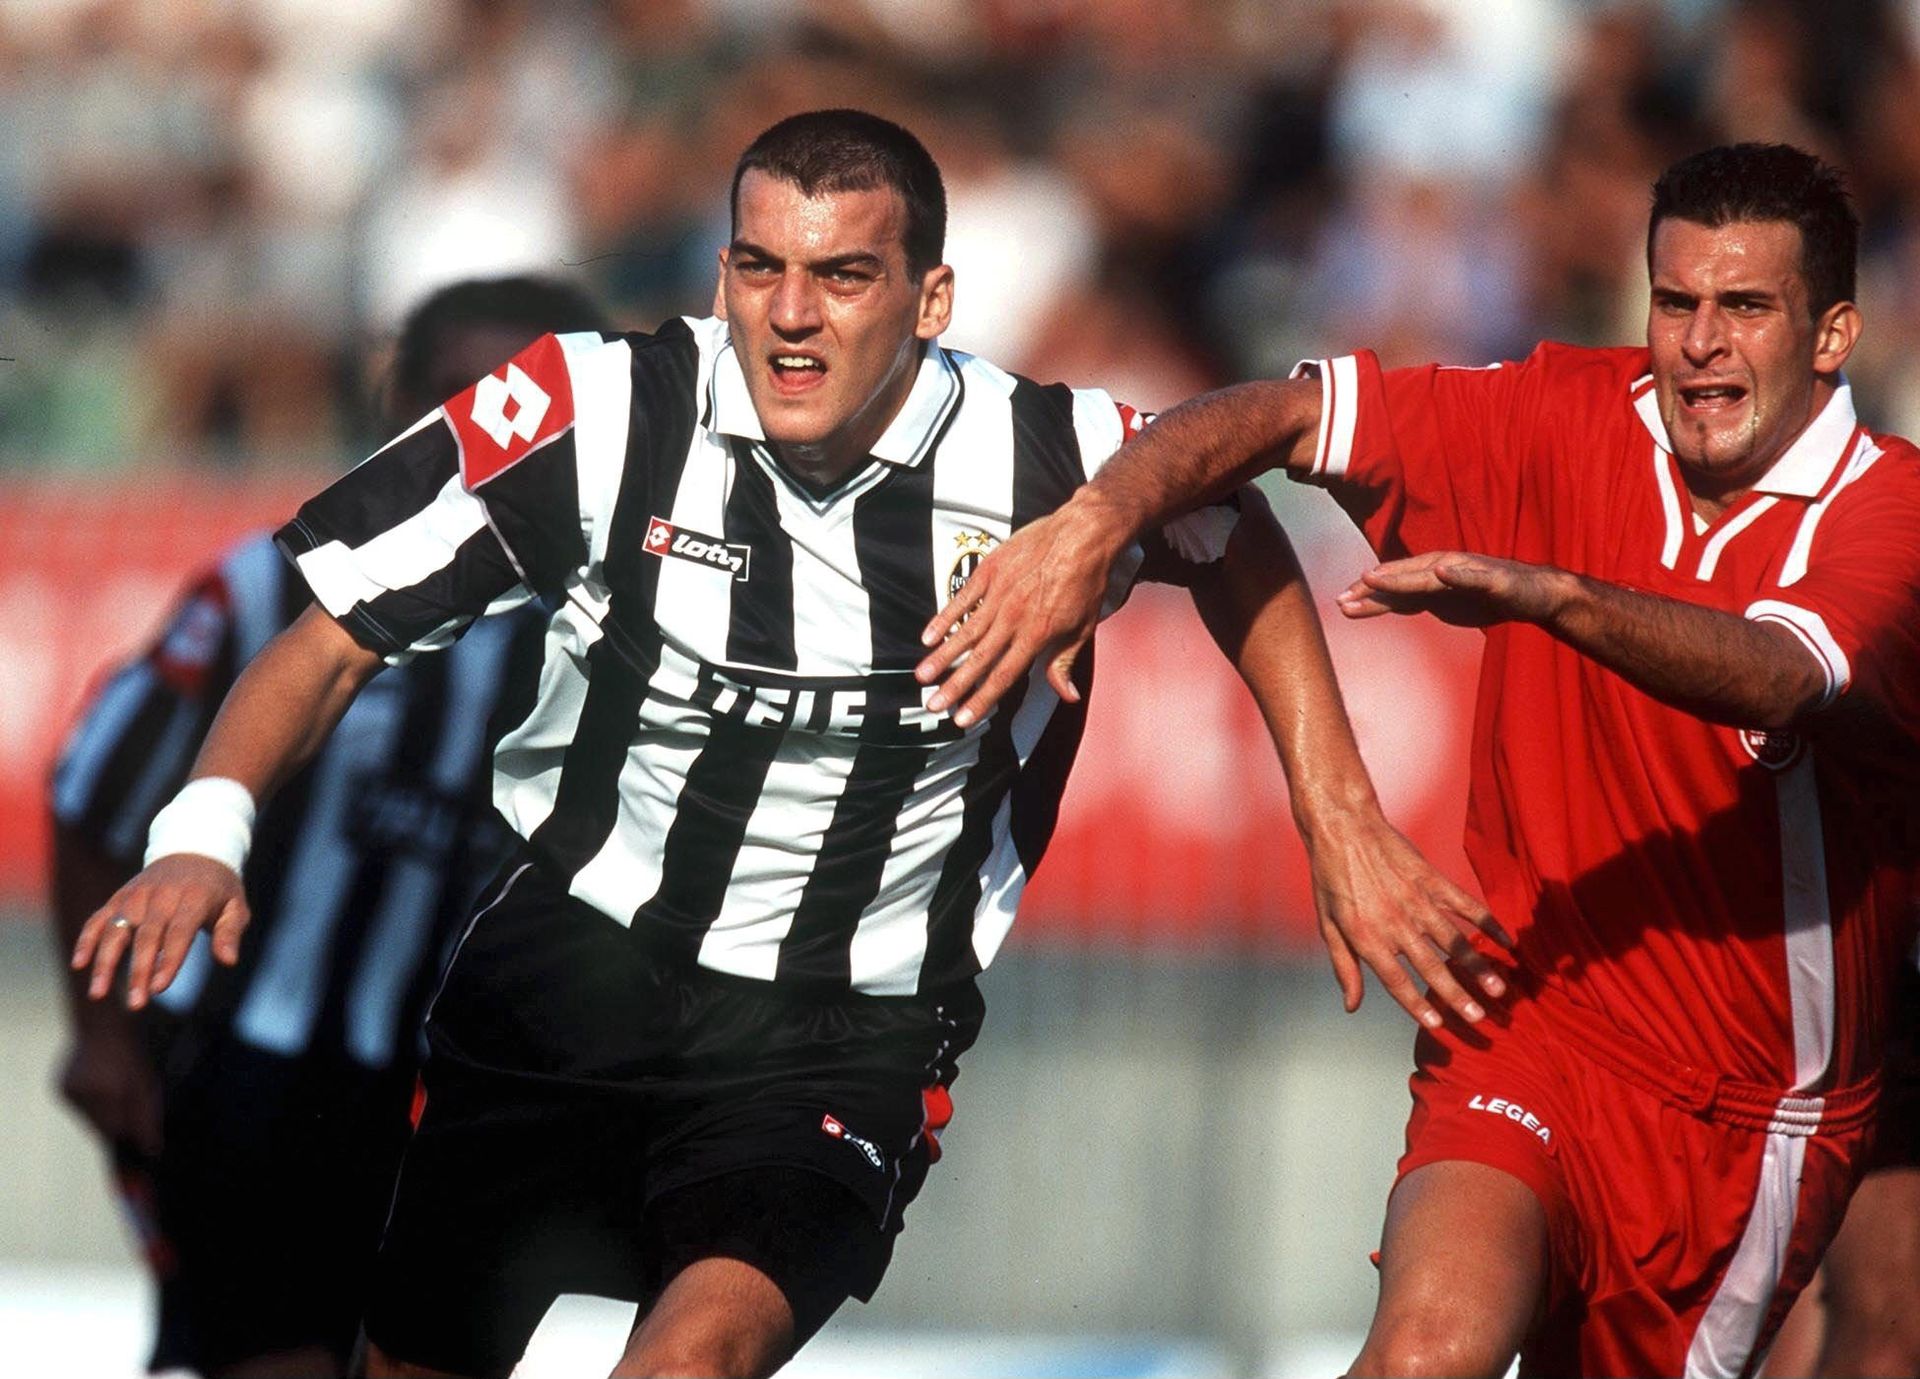 <p>                     After impressing in a three-season spell at Real Sociedad in the late 1990s, Darko Kovacevic swapped Spain for Italy in the summer of 1999.                   </p>                                      <p>                     The Serbian striker joined Juventus in a deal worth around €17 million, but spent just two seasons in Turin before spending half a year at Lazio and returning to Real Sociedad in 2001.                   </p>